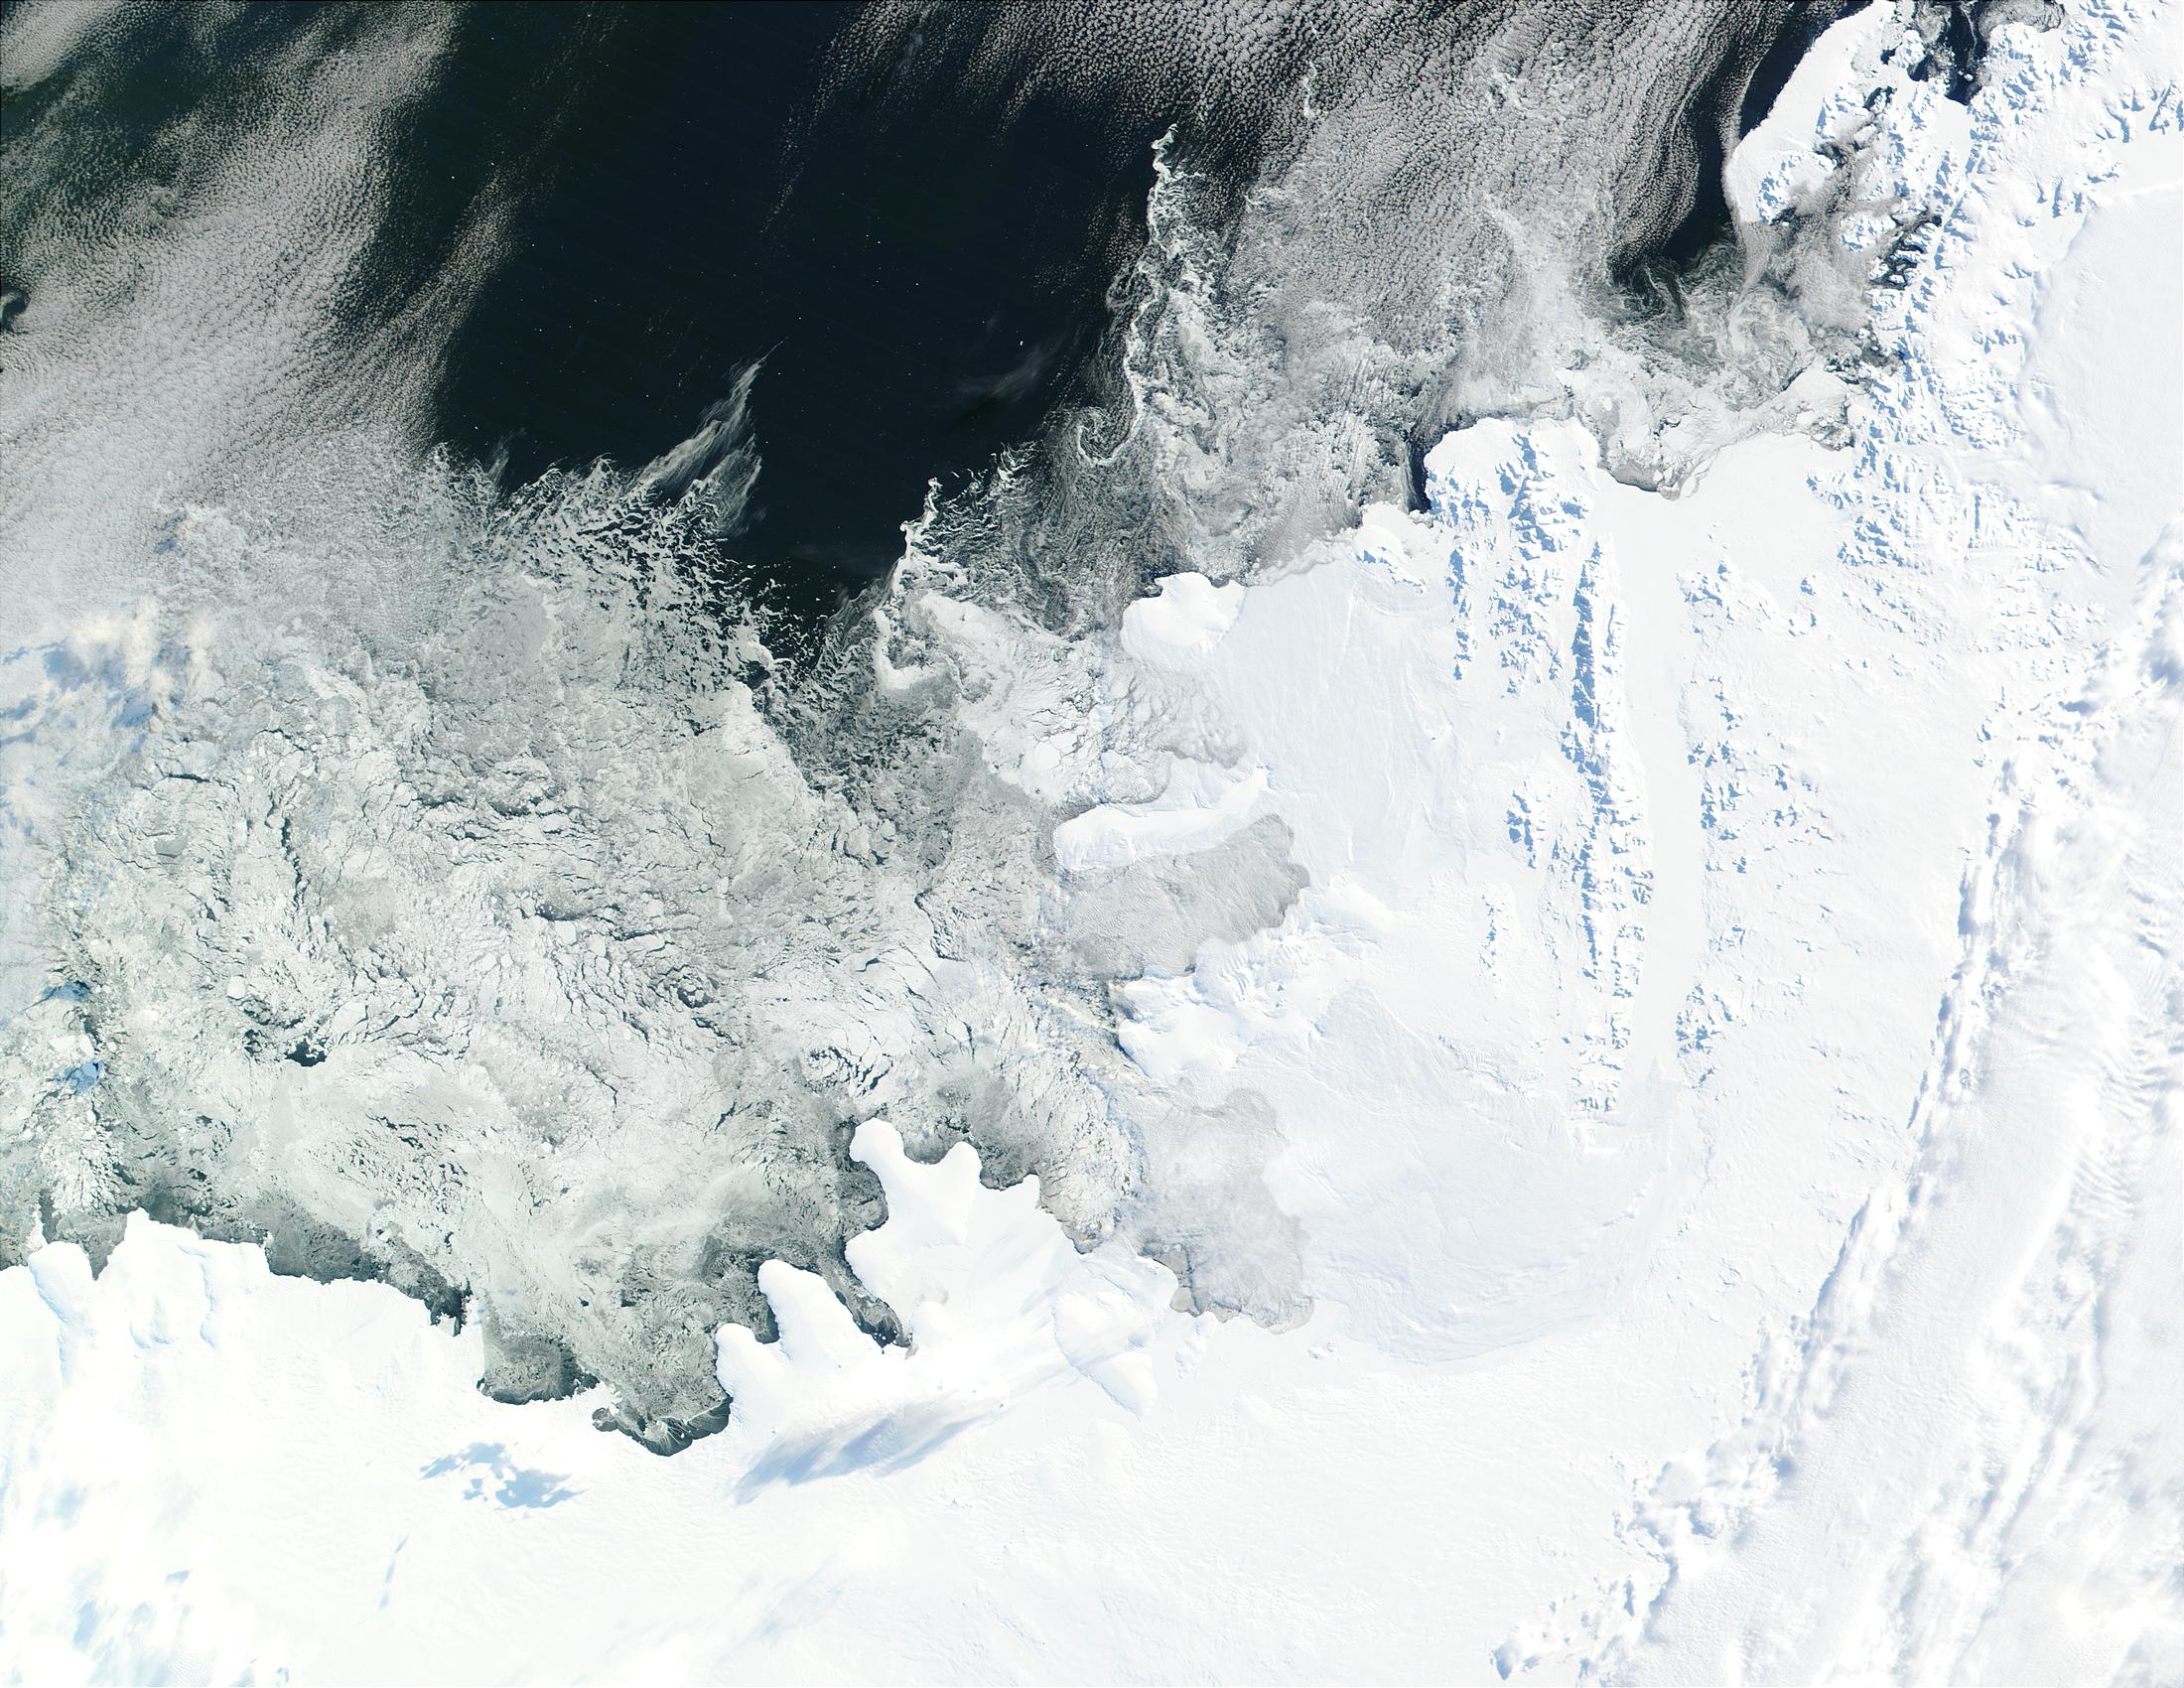 Bryan Coast, English Coast, Alexander Island, Fallieres Coast, and Bellingshausen Sea, Antarctica - related image preview